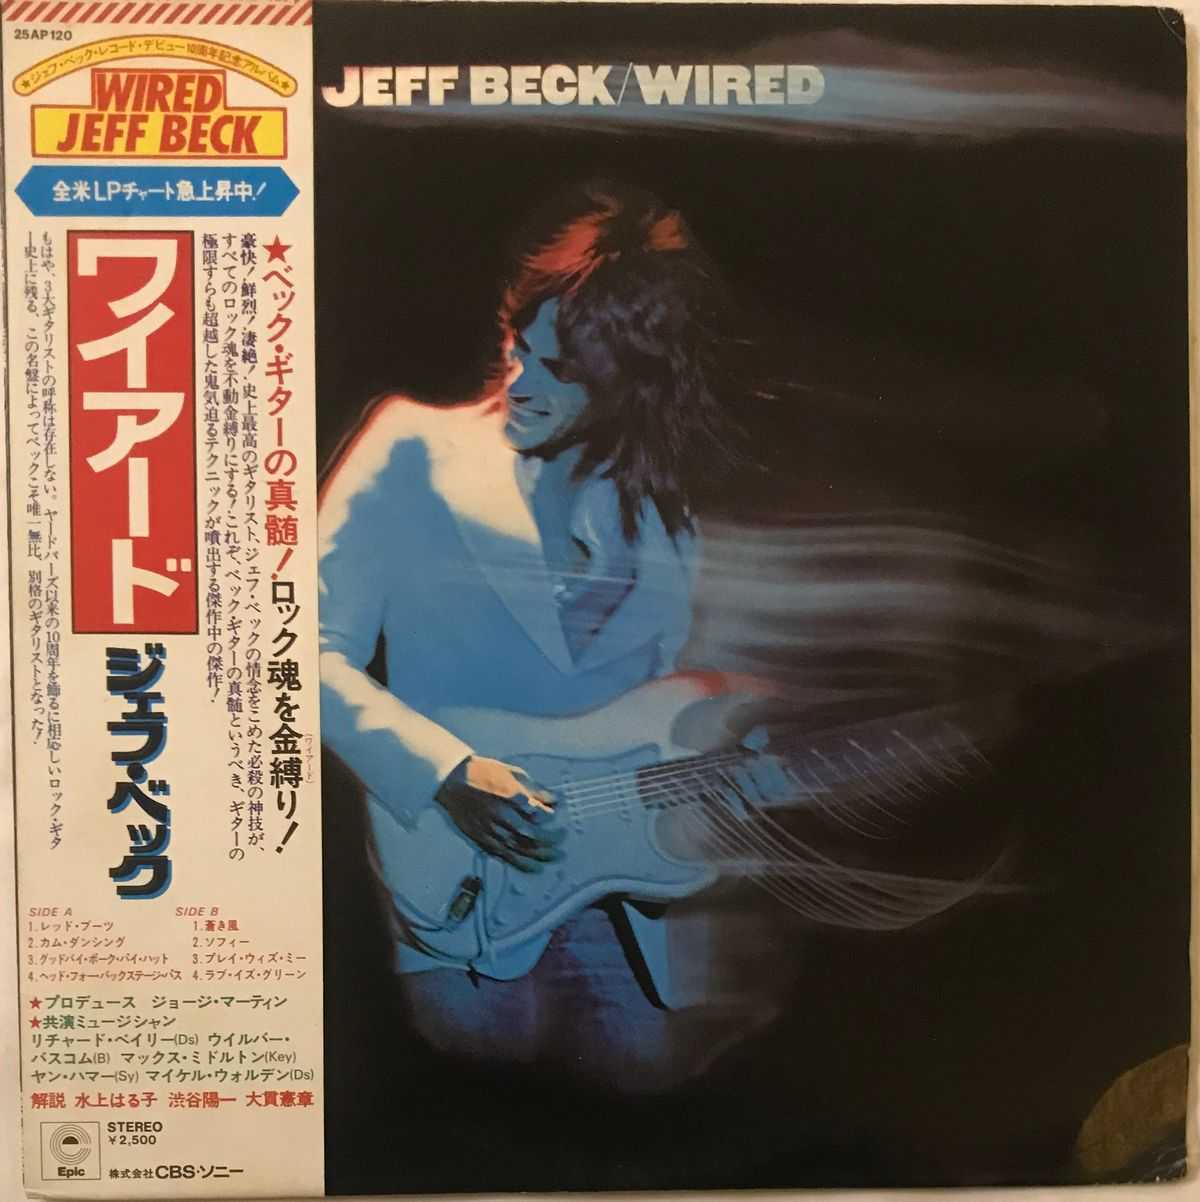 Wired - Jeff Beck Used Vinyl LP Record Japanese Pressing -